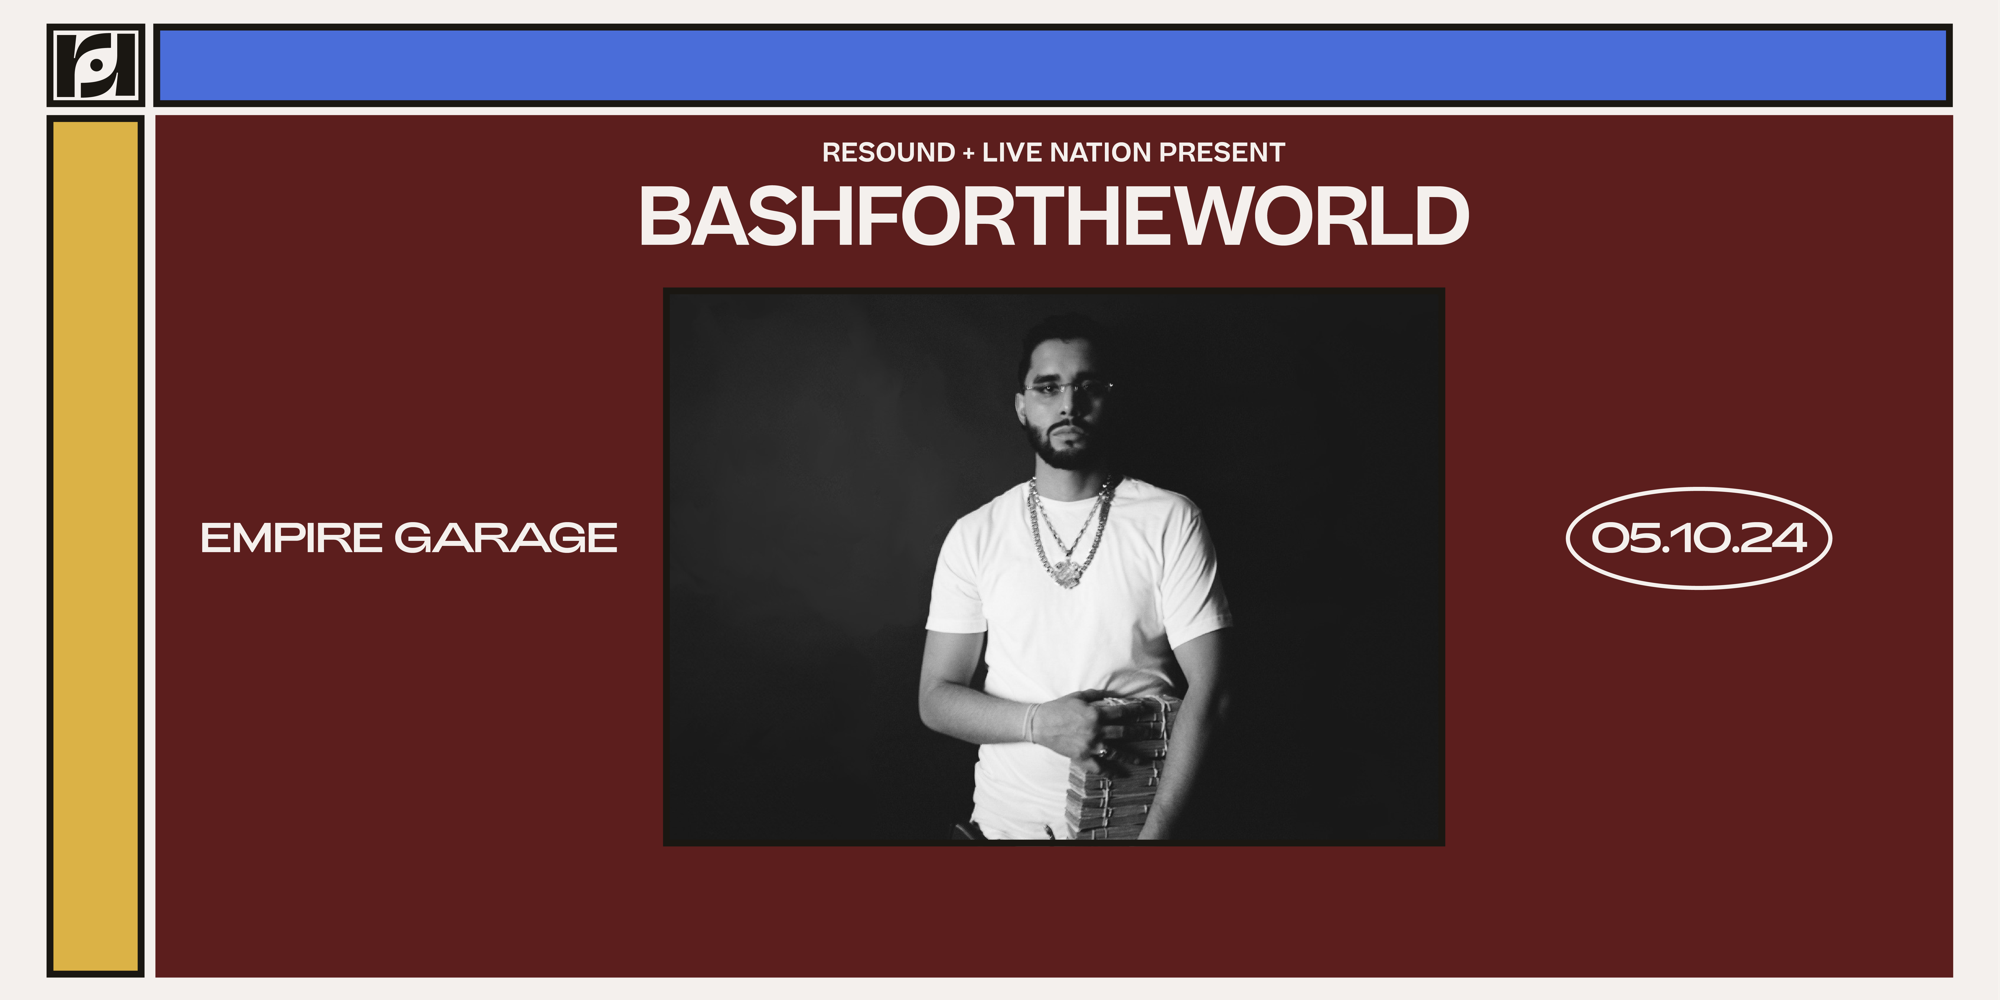 Resound & Live Nation Present: Bashfortheworld - From Dallas With Love. at Empire Garage promotional image